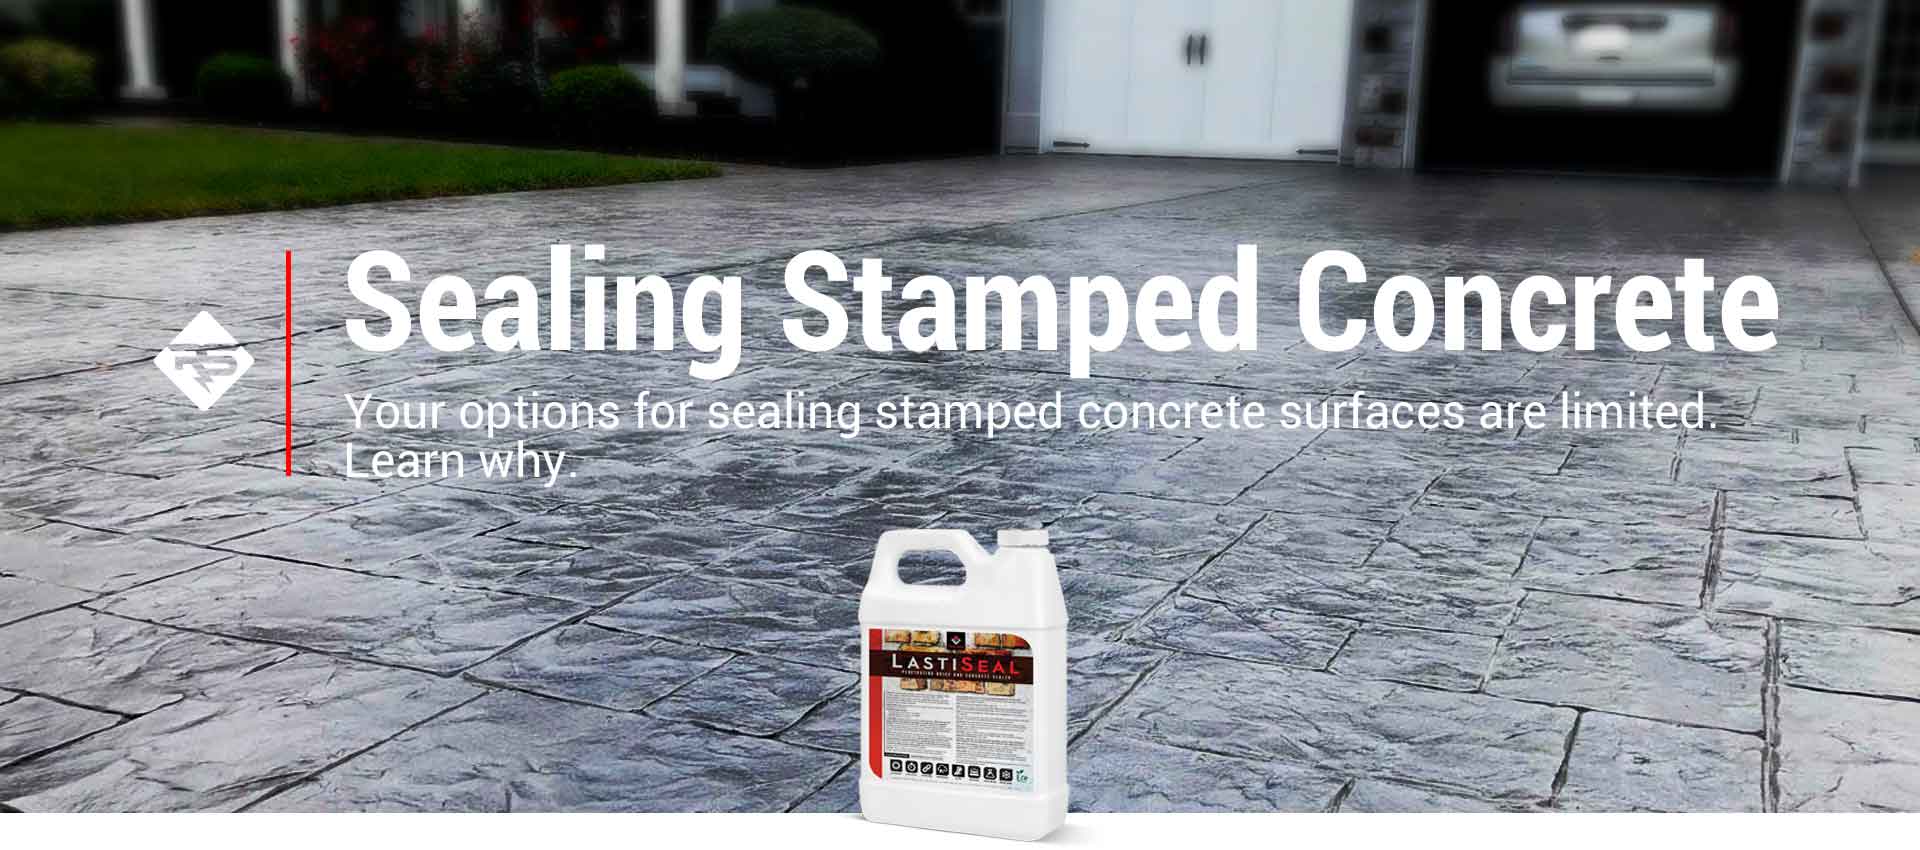 How To Seal Stamped Concrete Driveways and Pool Decks